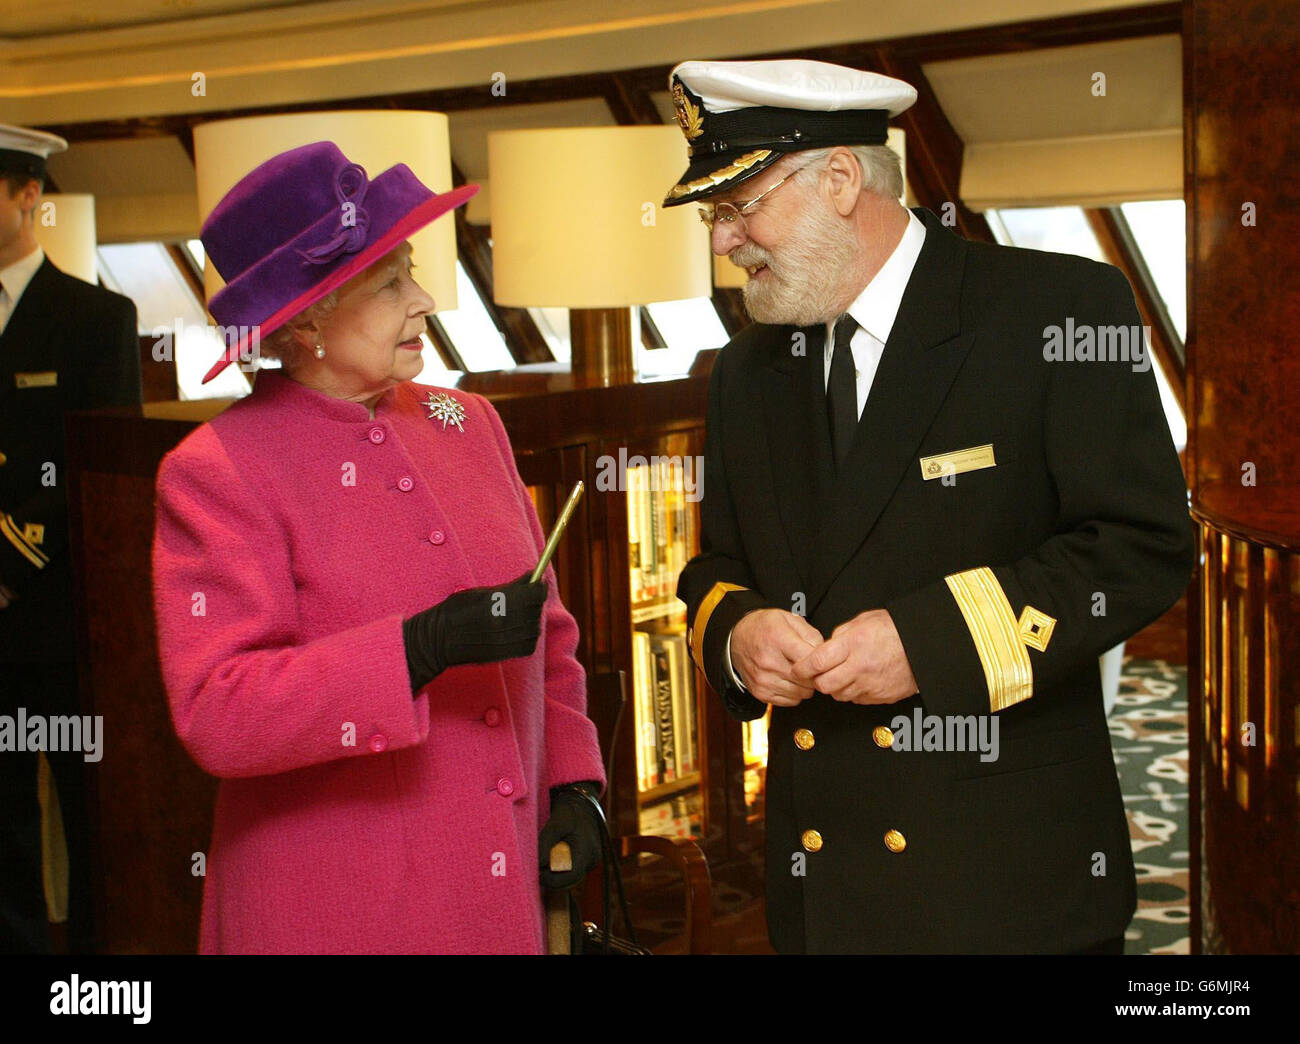 Queen Elizabeth II holds a pen made from part of a propeller on the original Queen Elizabeth ship, as she talks to Commador Ronald Warwick on the bridge of the Queen Mary 2 cruise liner in Southampton Docks, before naming the 550 million vessel in front of more than 2,000 guests. It was the first time the Queen had named a Cunard ship since the launch in 1967 of the QE2, whose Southampton to New York service will be taken over by the 2,620-passenger QM2 in April. Stock Photo